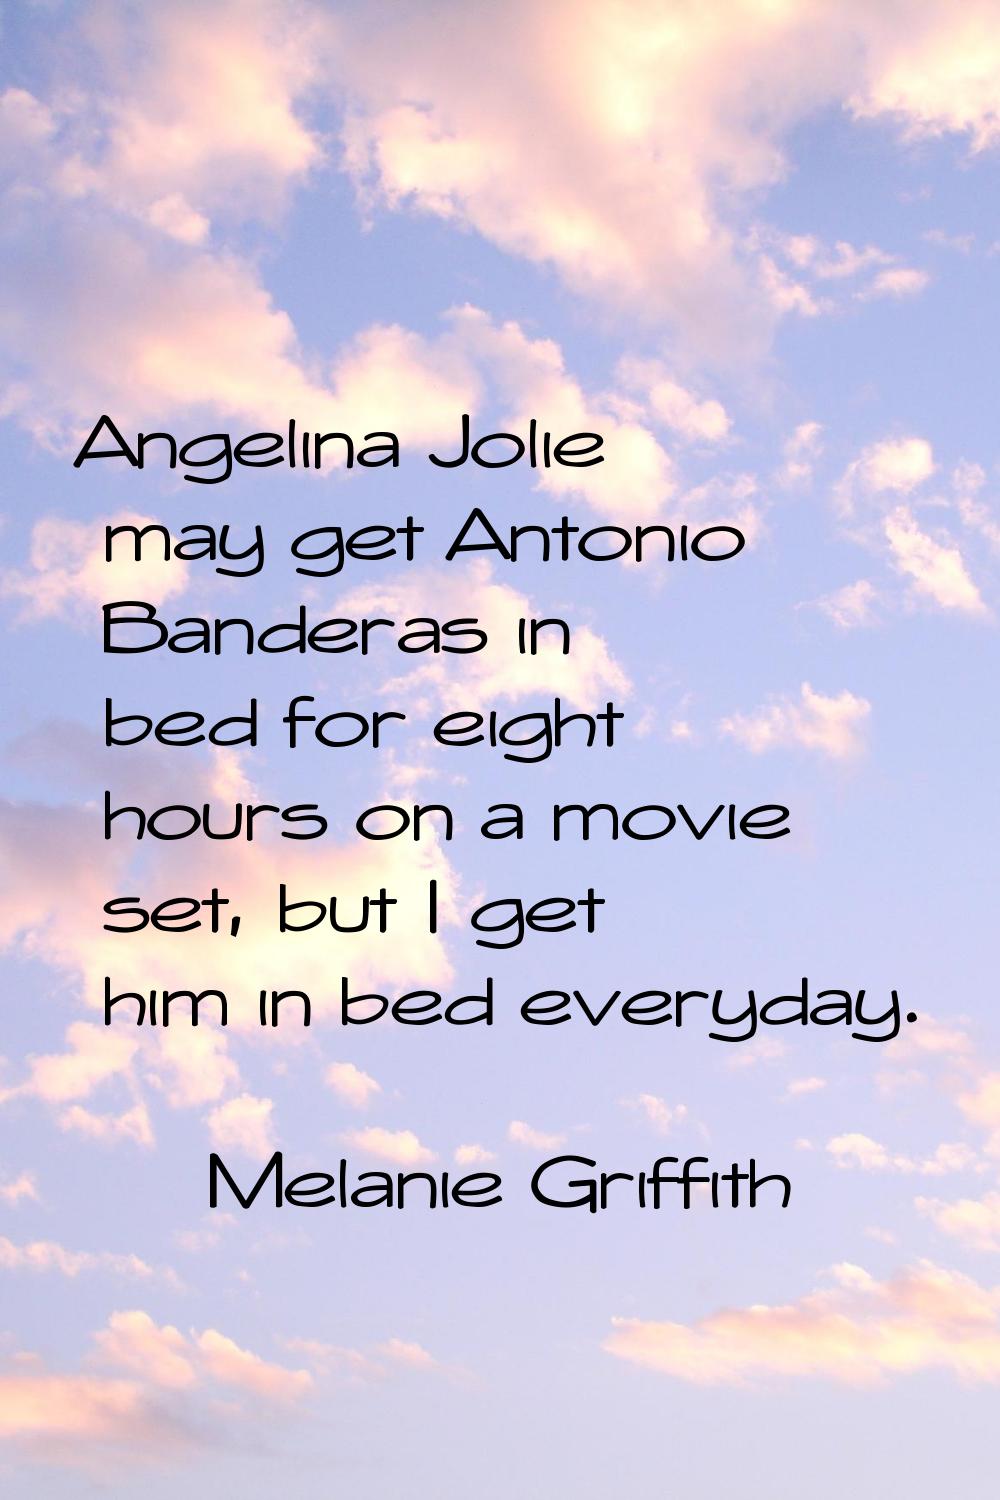 Angelina Jolie may get Antonio Banderas in bed for eight hours on a movie set, but I get him in bed